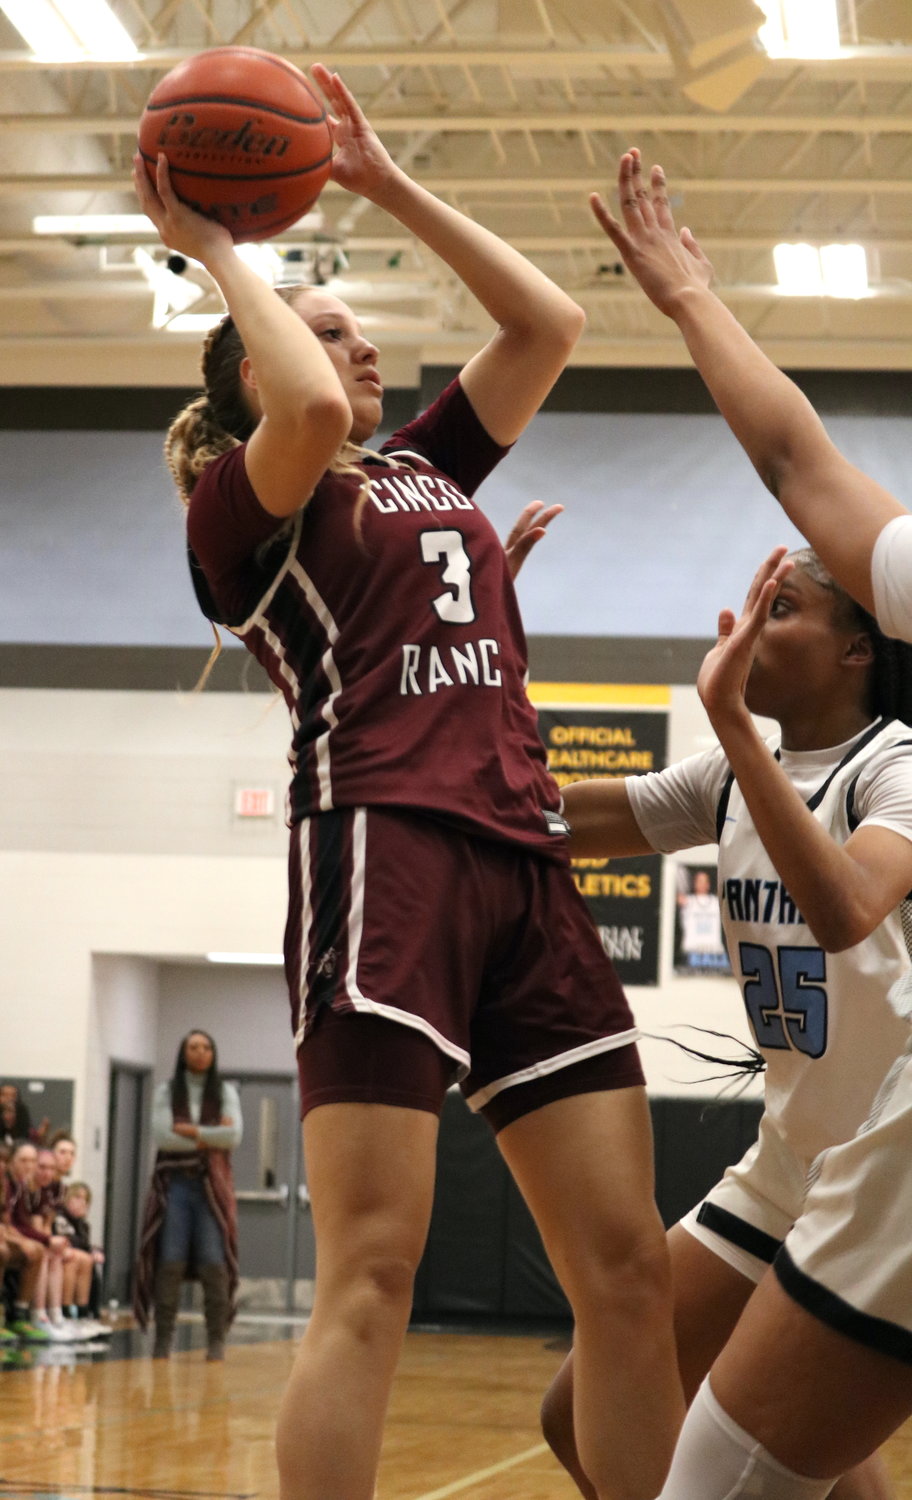 Camille Torrence shoots a jump shot during Friday's game between Cinco Ranch and Paetow at the Paetow gym.